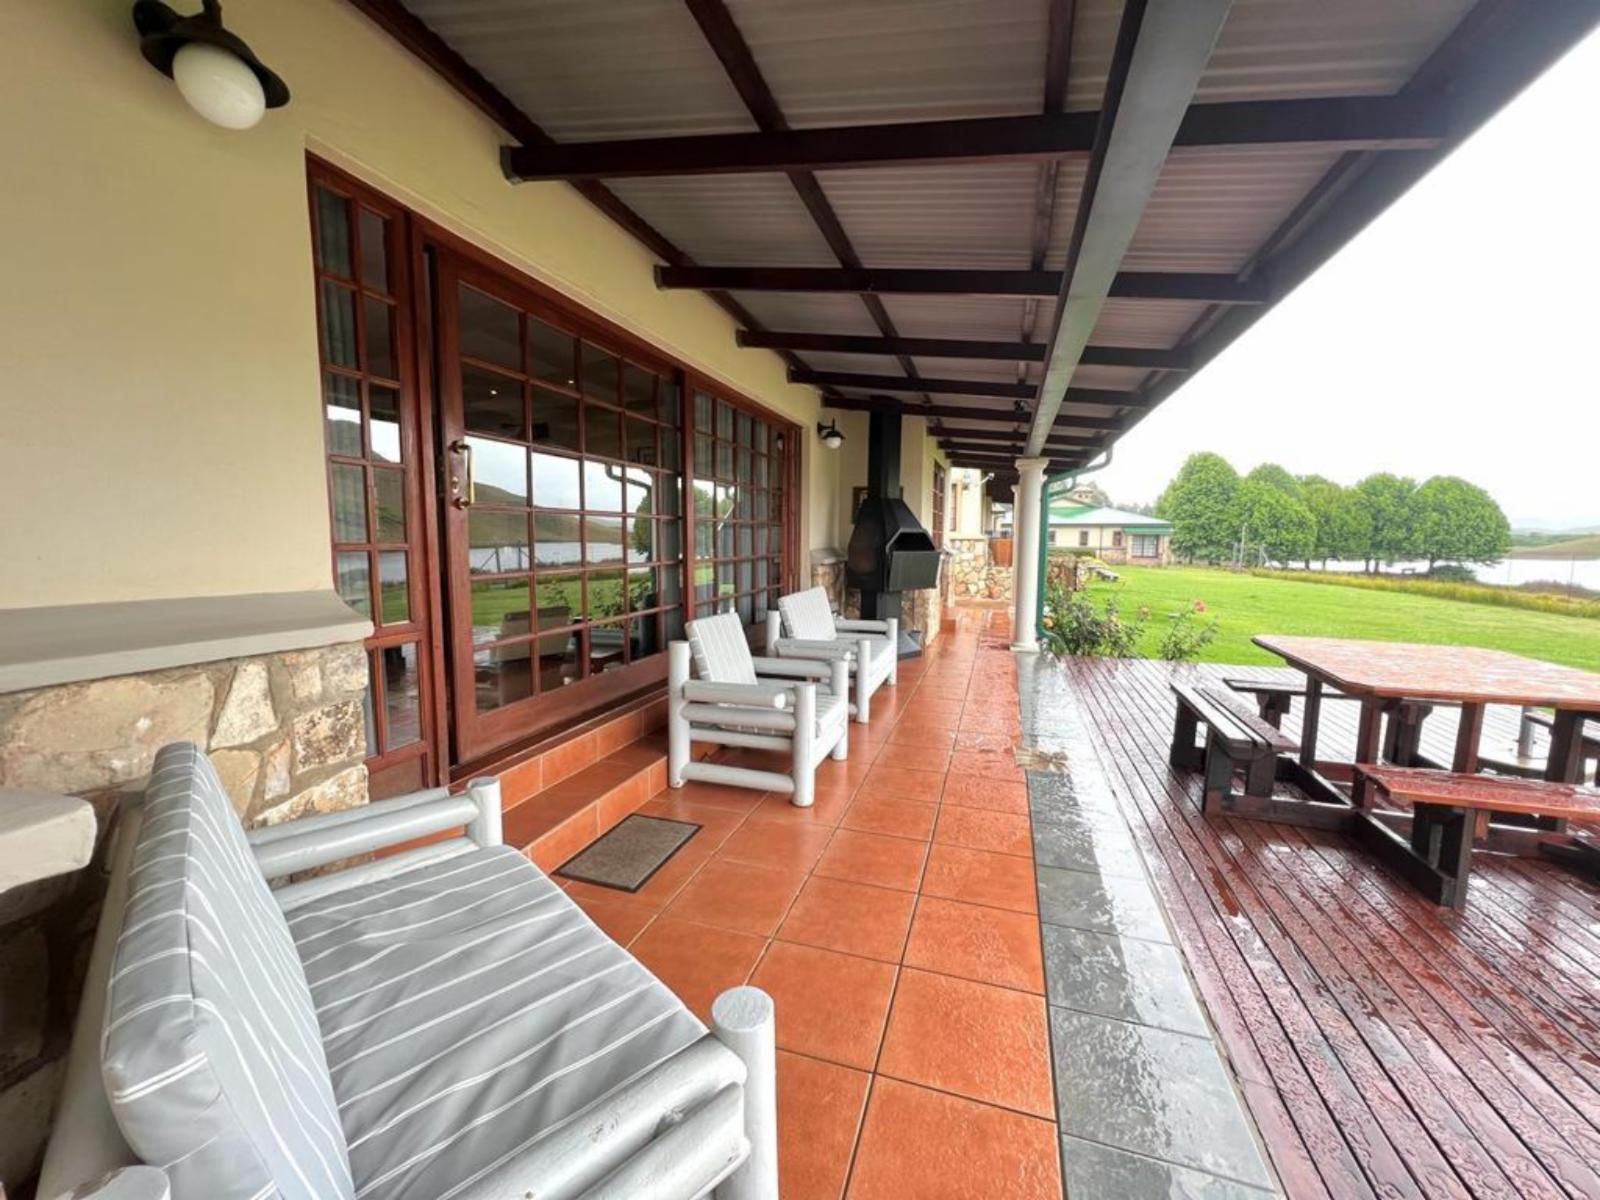 Oaklane Estate Le Rendezvous Dullstroom Mpumalanga South Africa House, Building, Architecture, Living Room